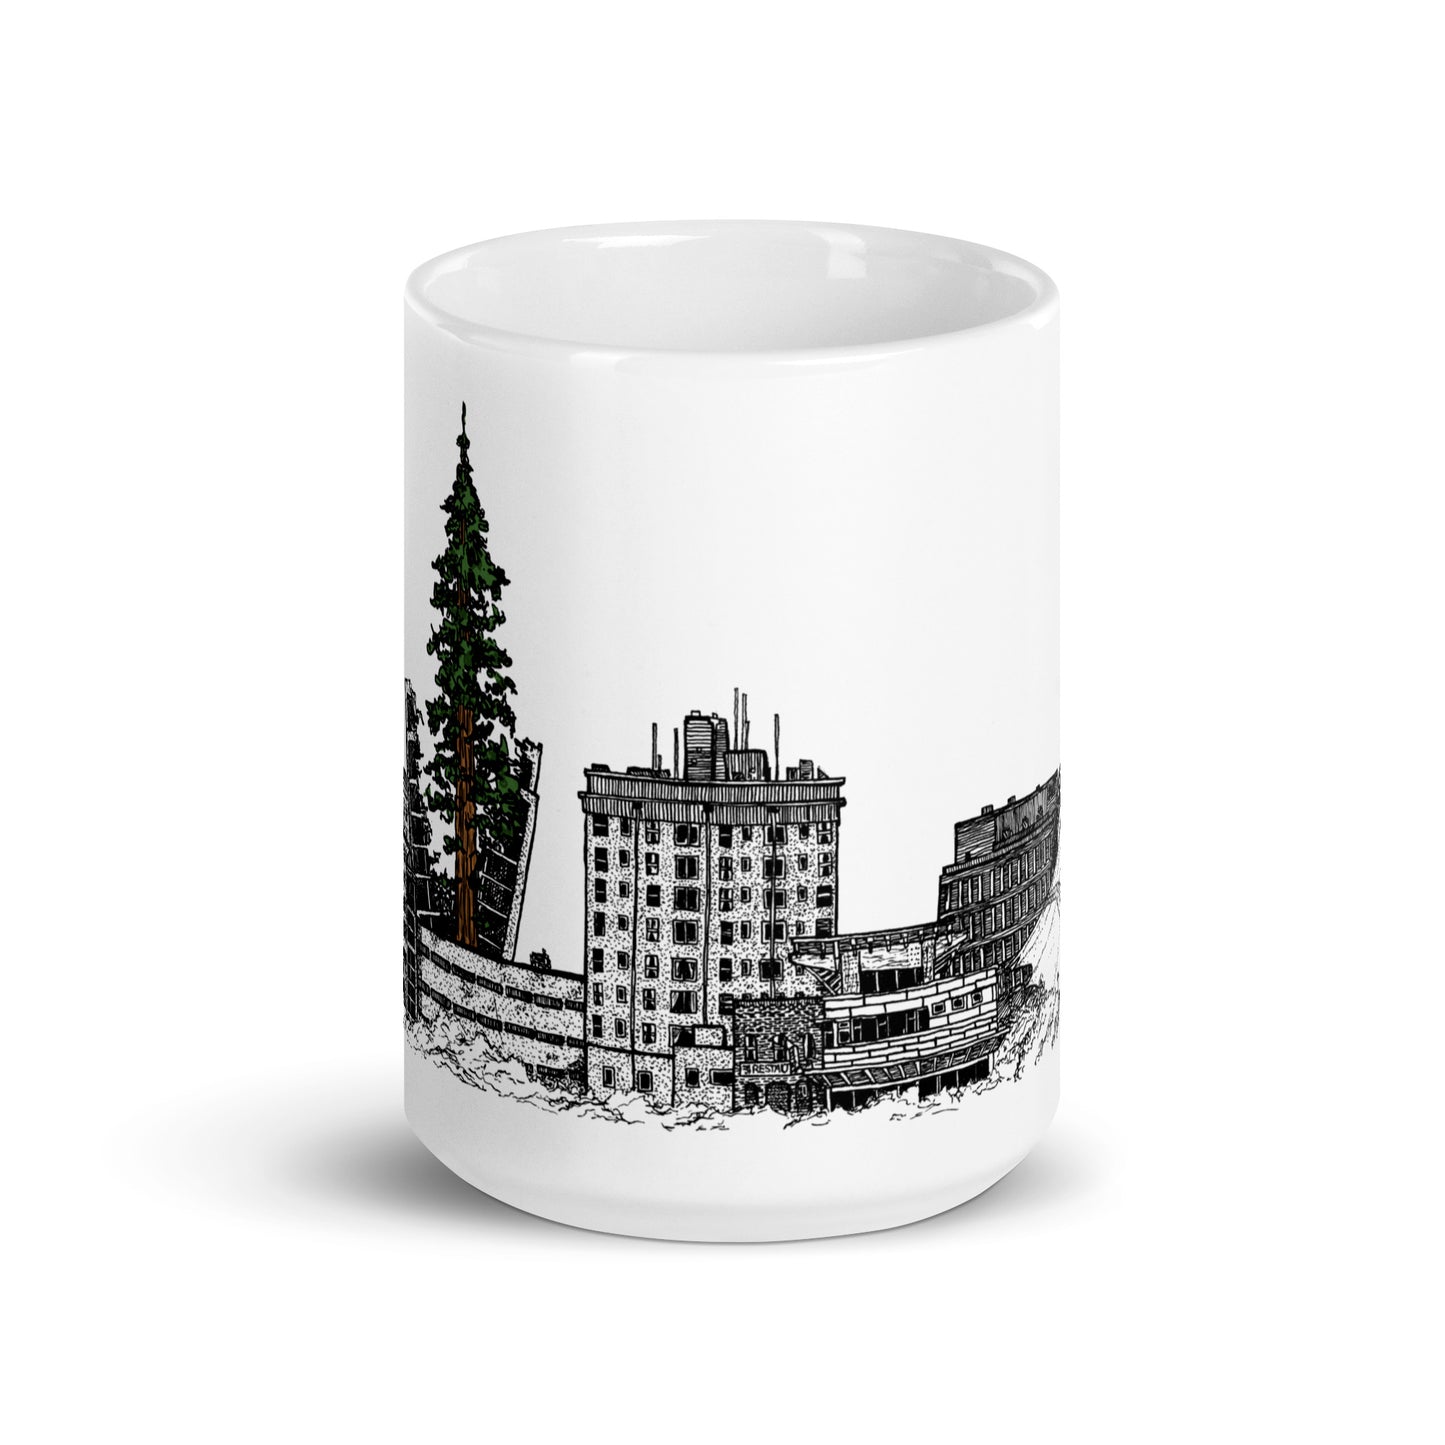 BellavanceInk: Coffee Mug With Pen & Ink Watercolor Sketch Of A Giant Sequoia Growing Out Of The Abandoned Landmark Hotel In Charlottesville